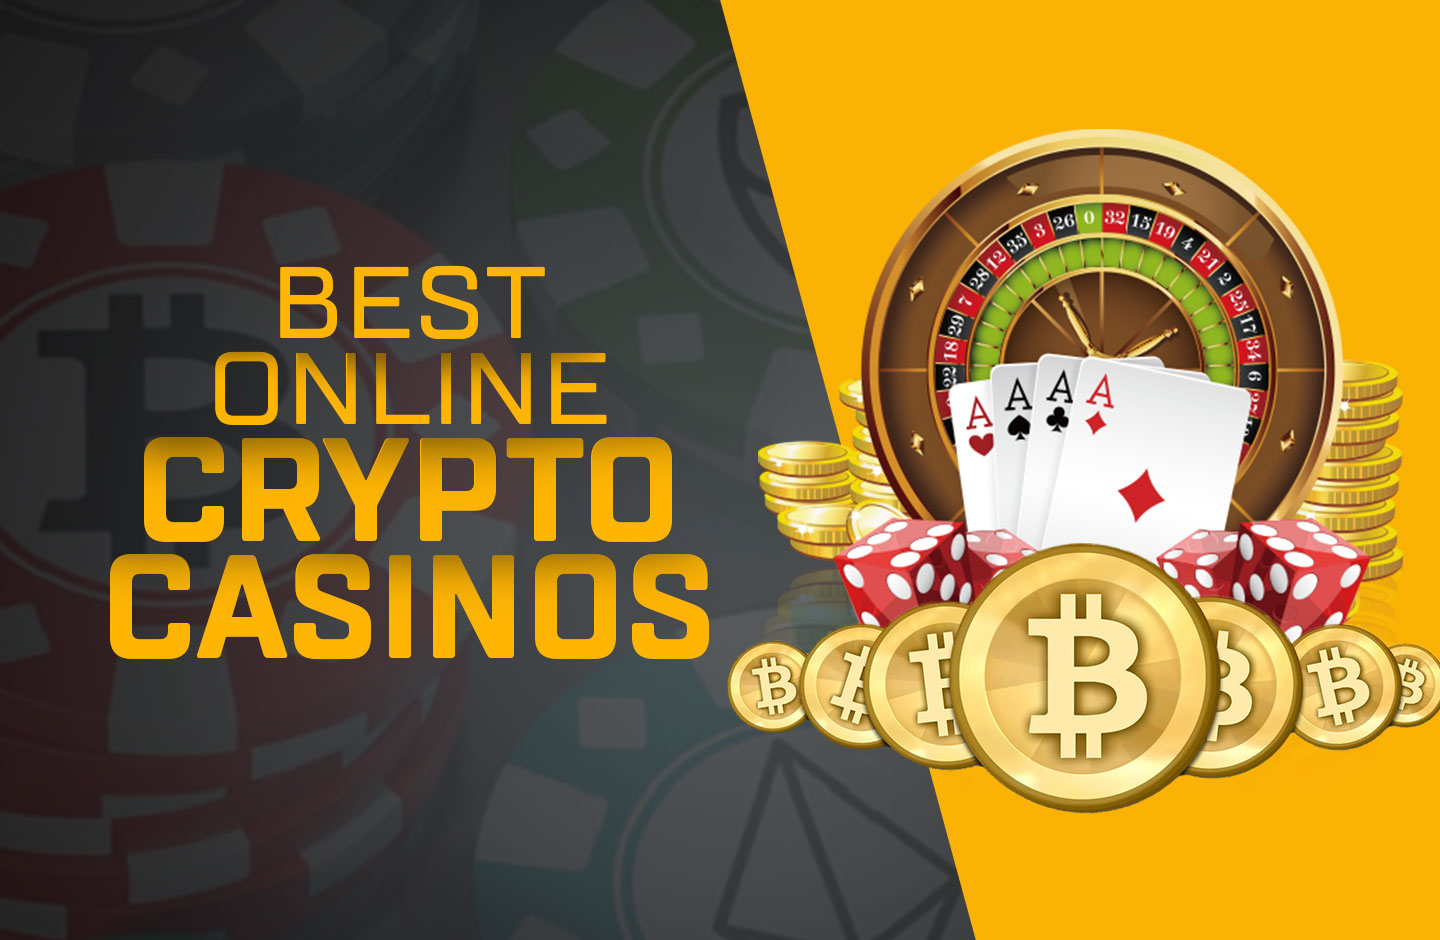 20 Myths About Bitcoin Casino Sites in 2021